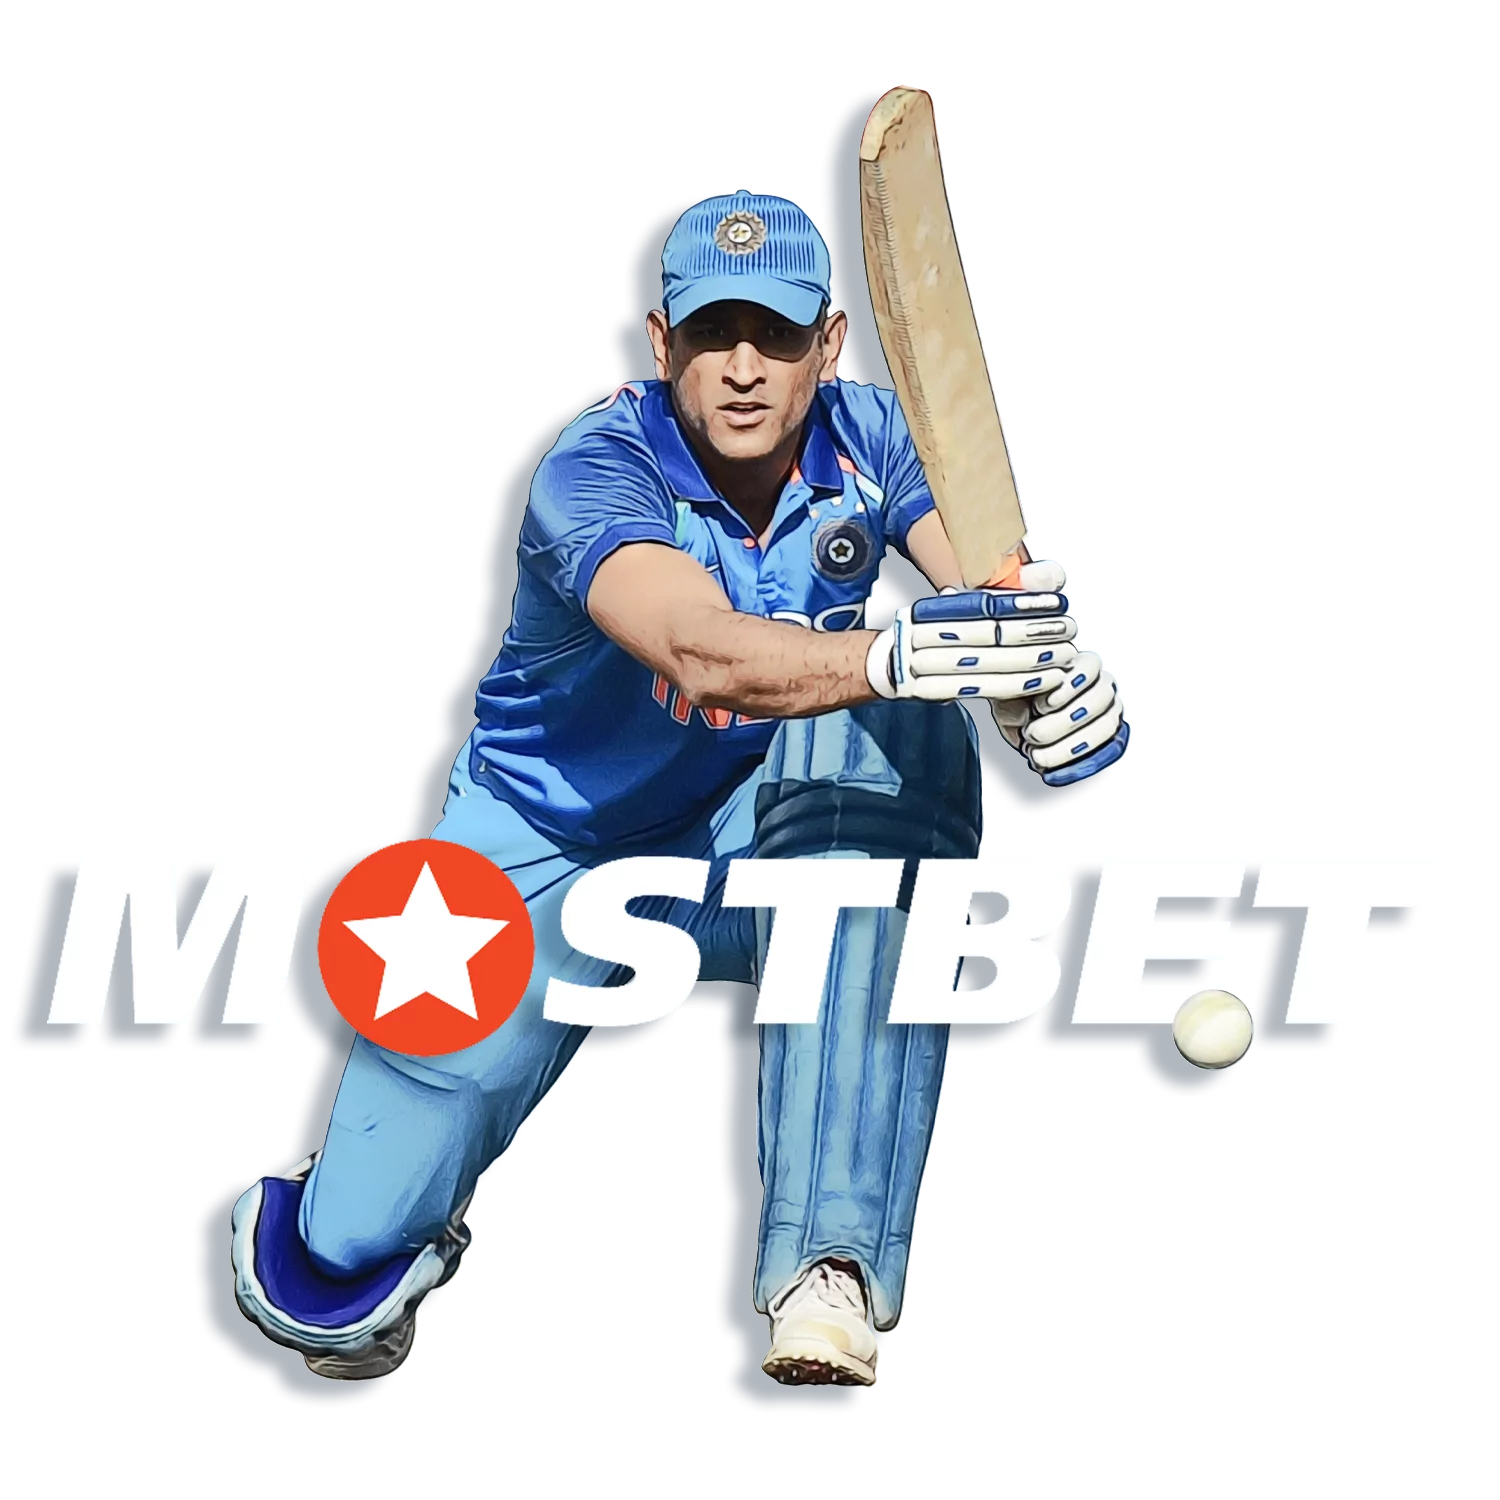 Start betting on sports and play casino games at Mostbet with a bonus of up to INR 25,000.